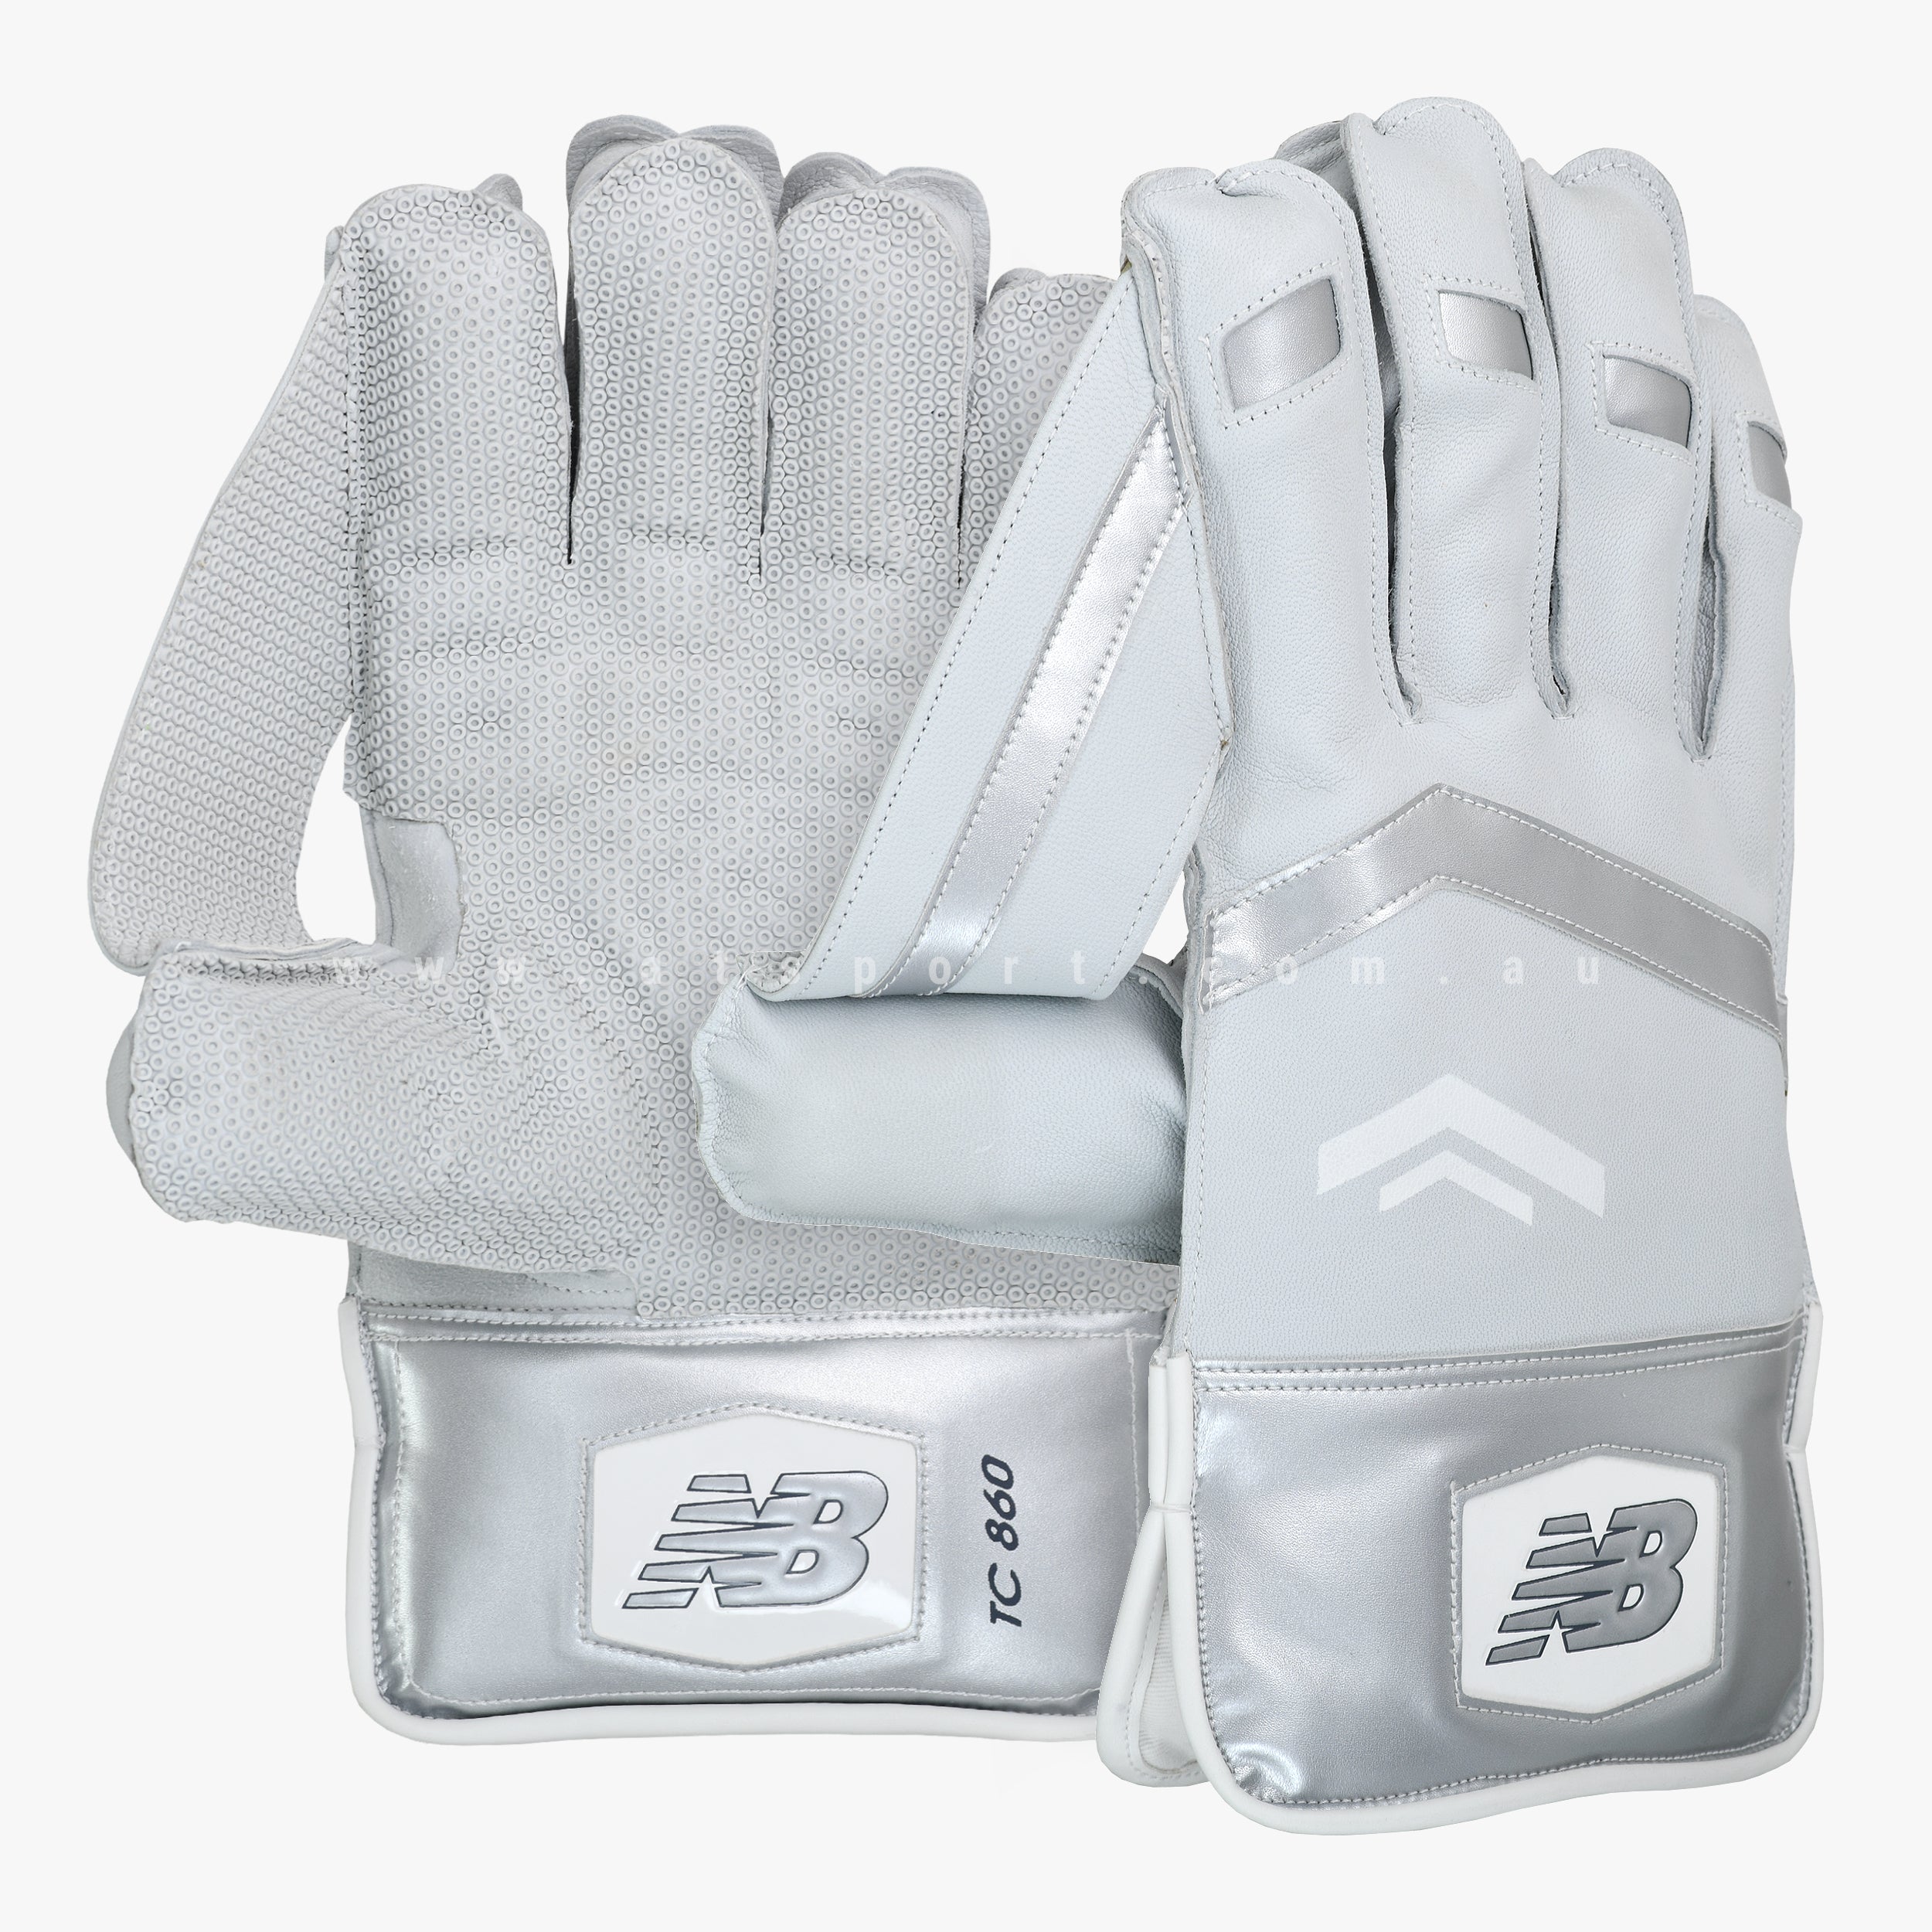 New Balance TC 860 Wicket Keeping Gloves - ADULT